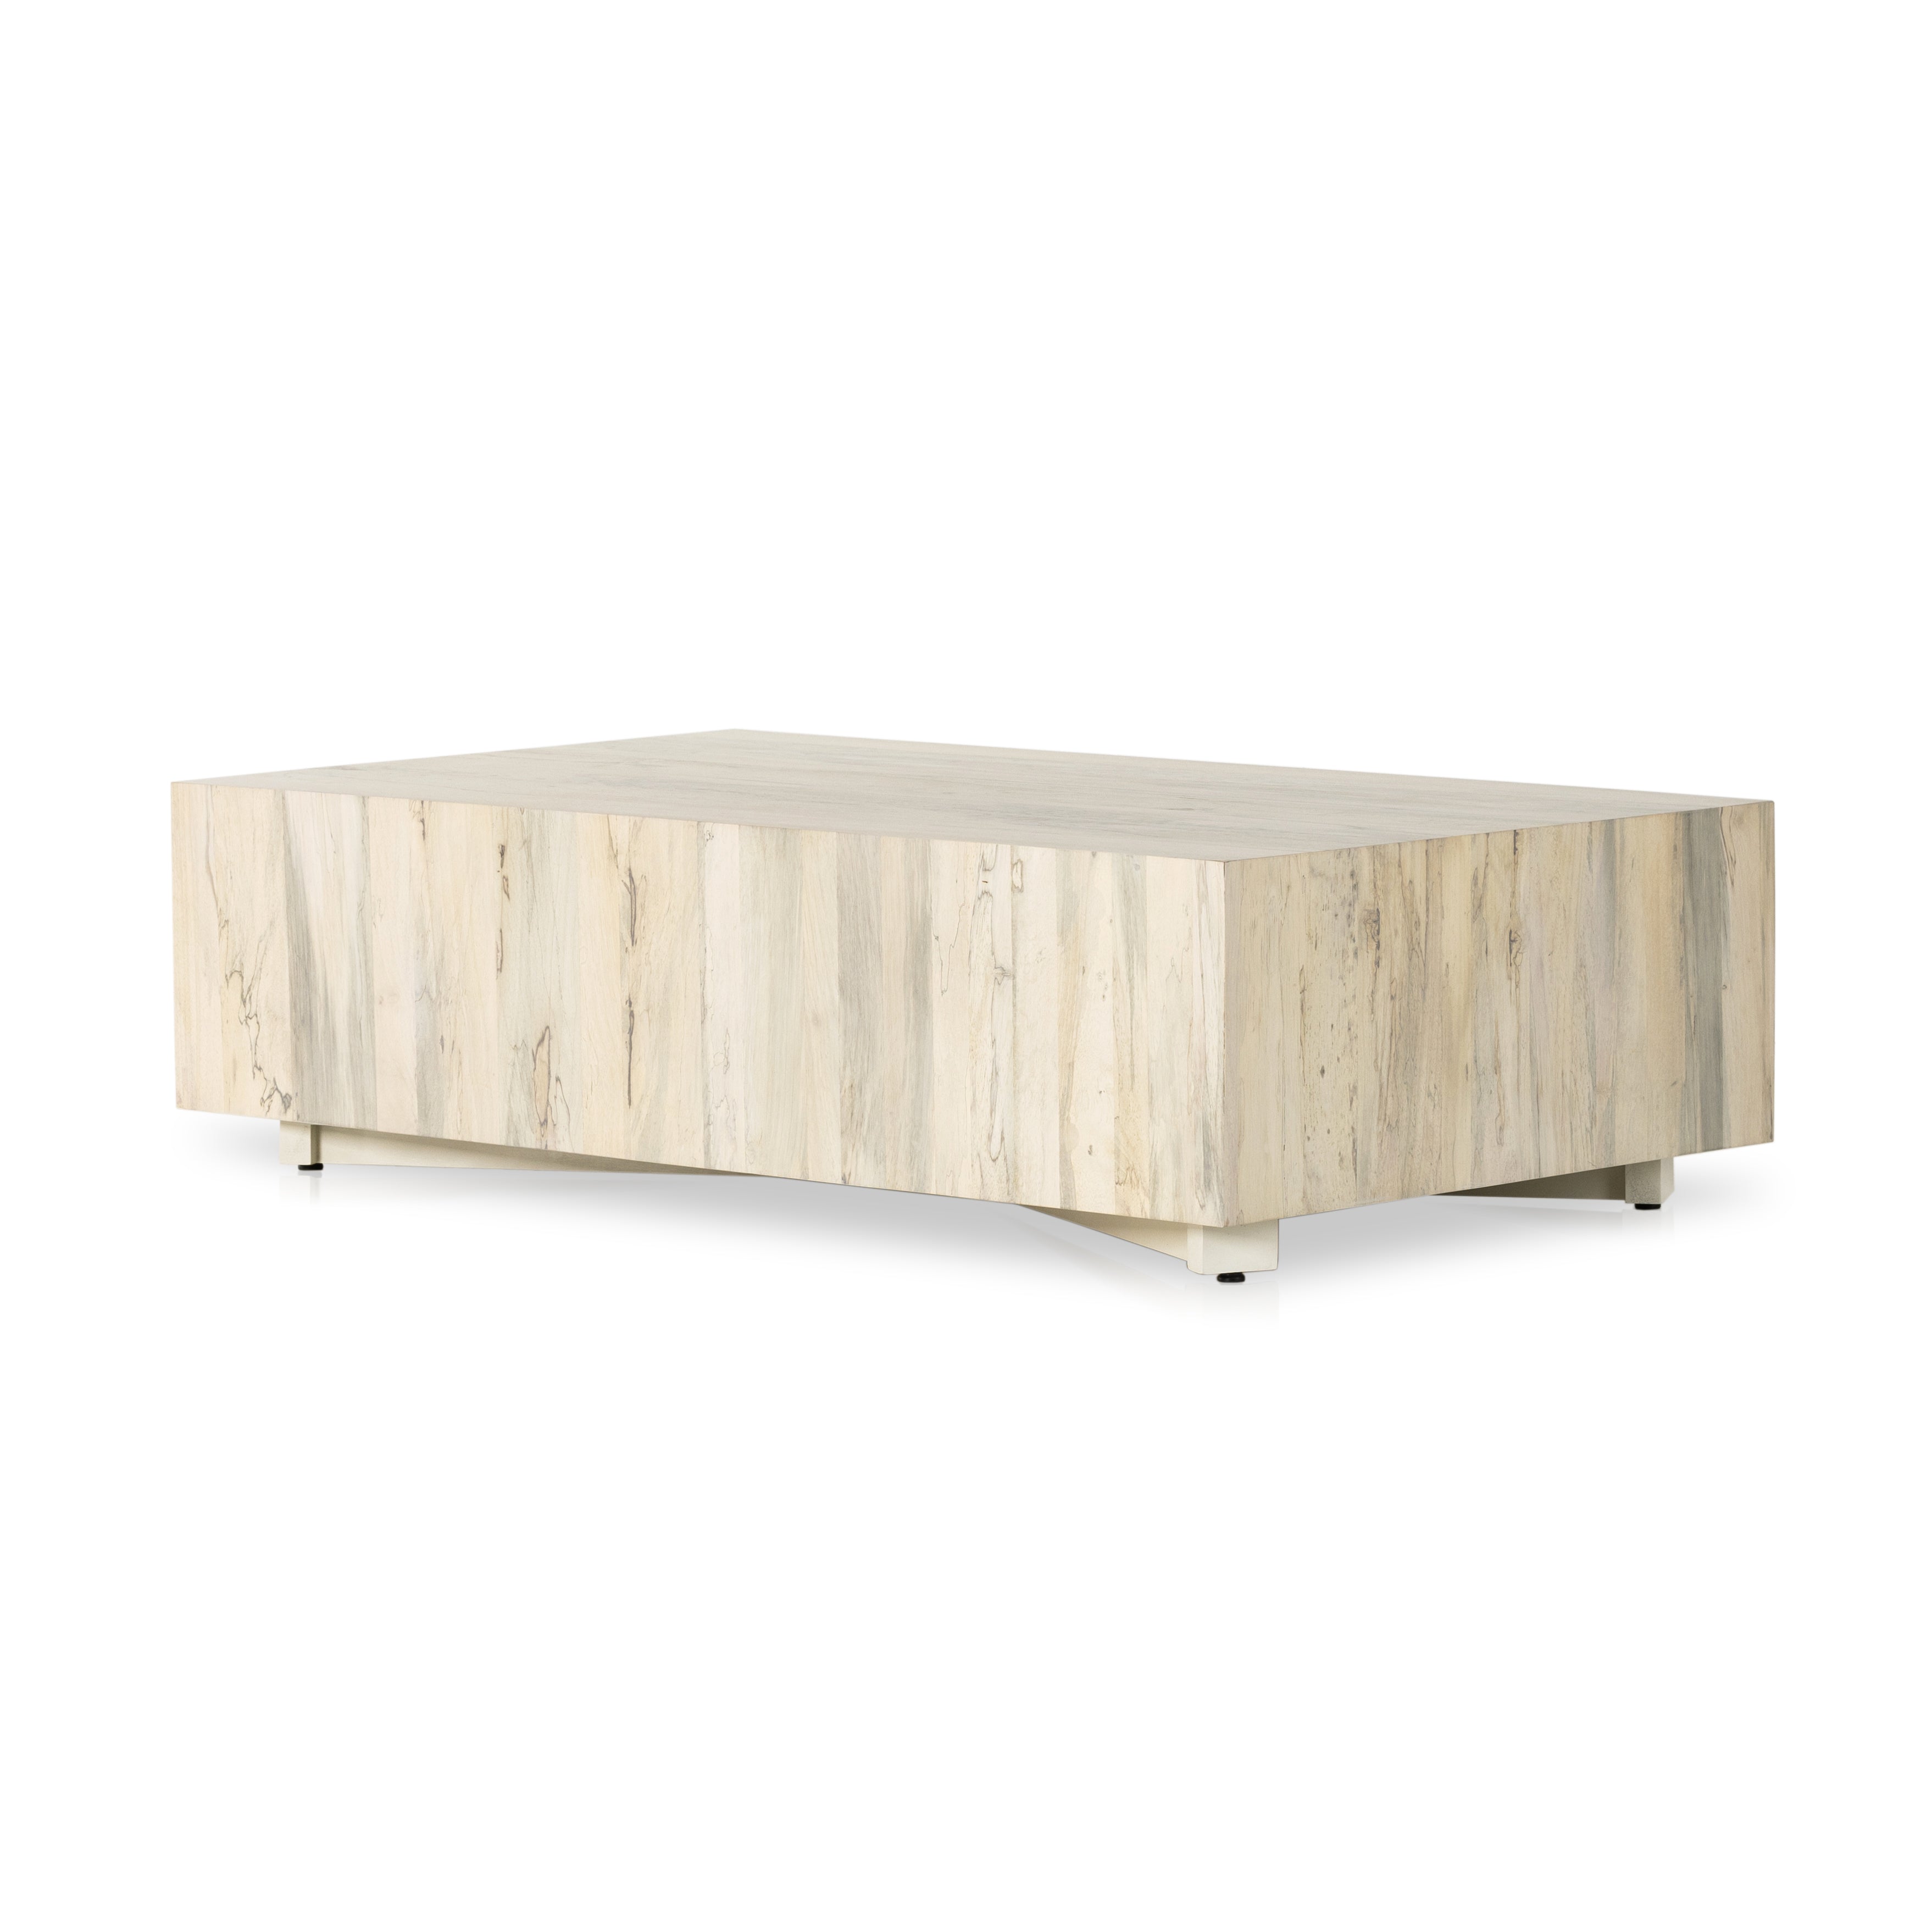 Stunning forces of nature, captured in a coffee table. Spalted primavera wood is hand-shaped into a rectangular silhouette and finished in a white hue. Reflective of woods' natural character, a slight color variance is possible from piece to piece. Amethyst Home provides interior design, new construction, custom furniture, and area rugs in the Austin metro area.